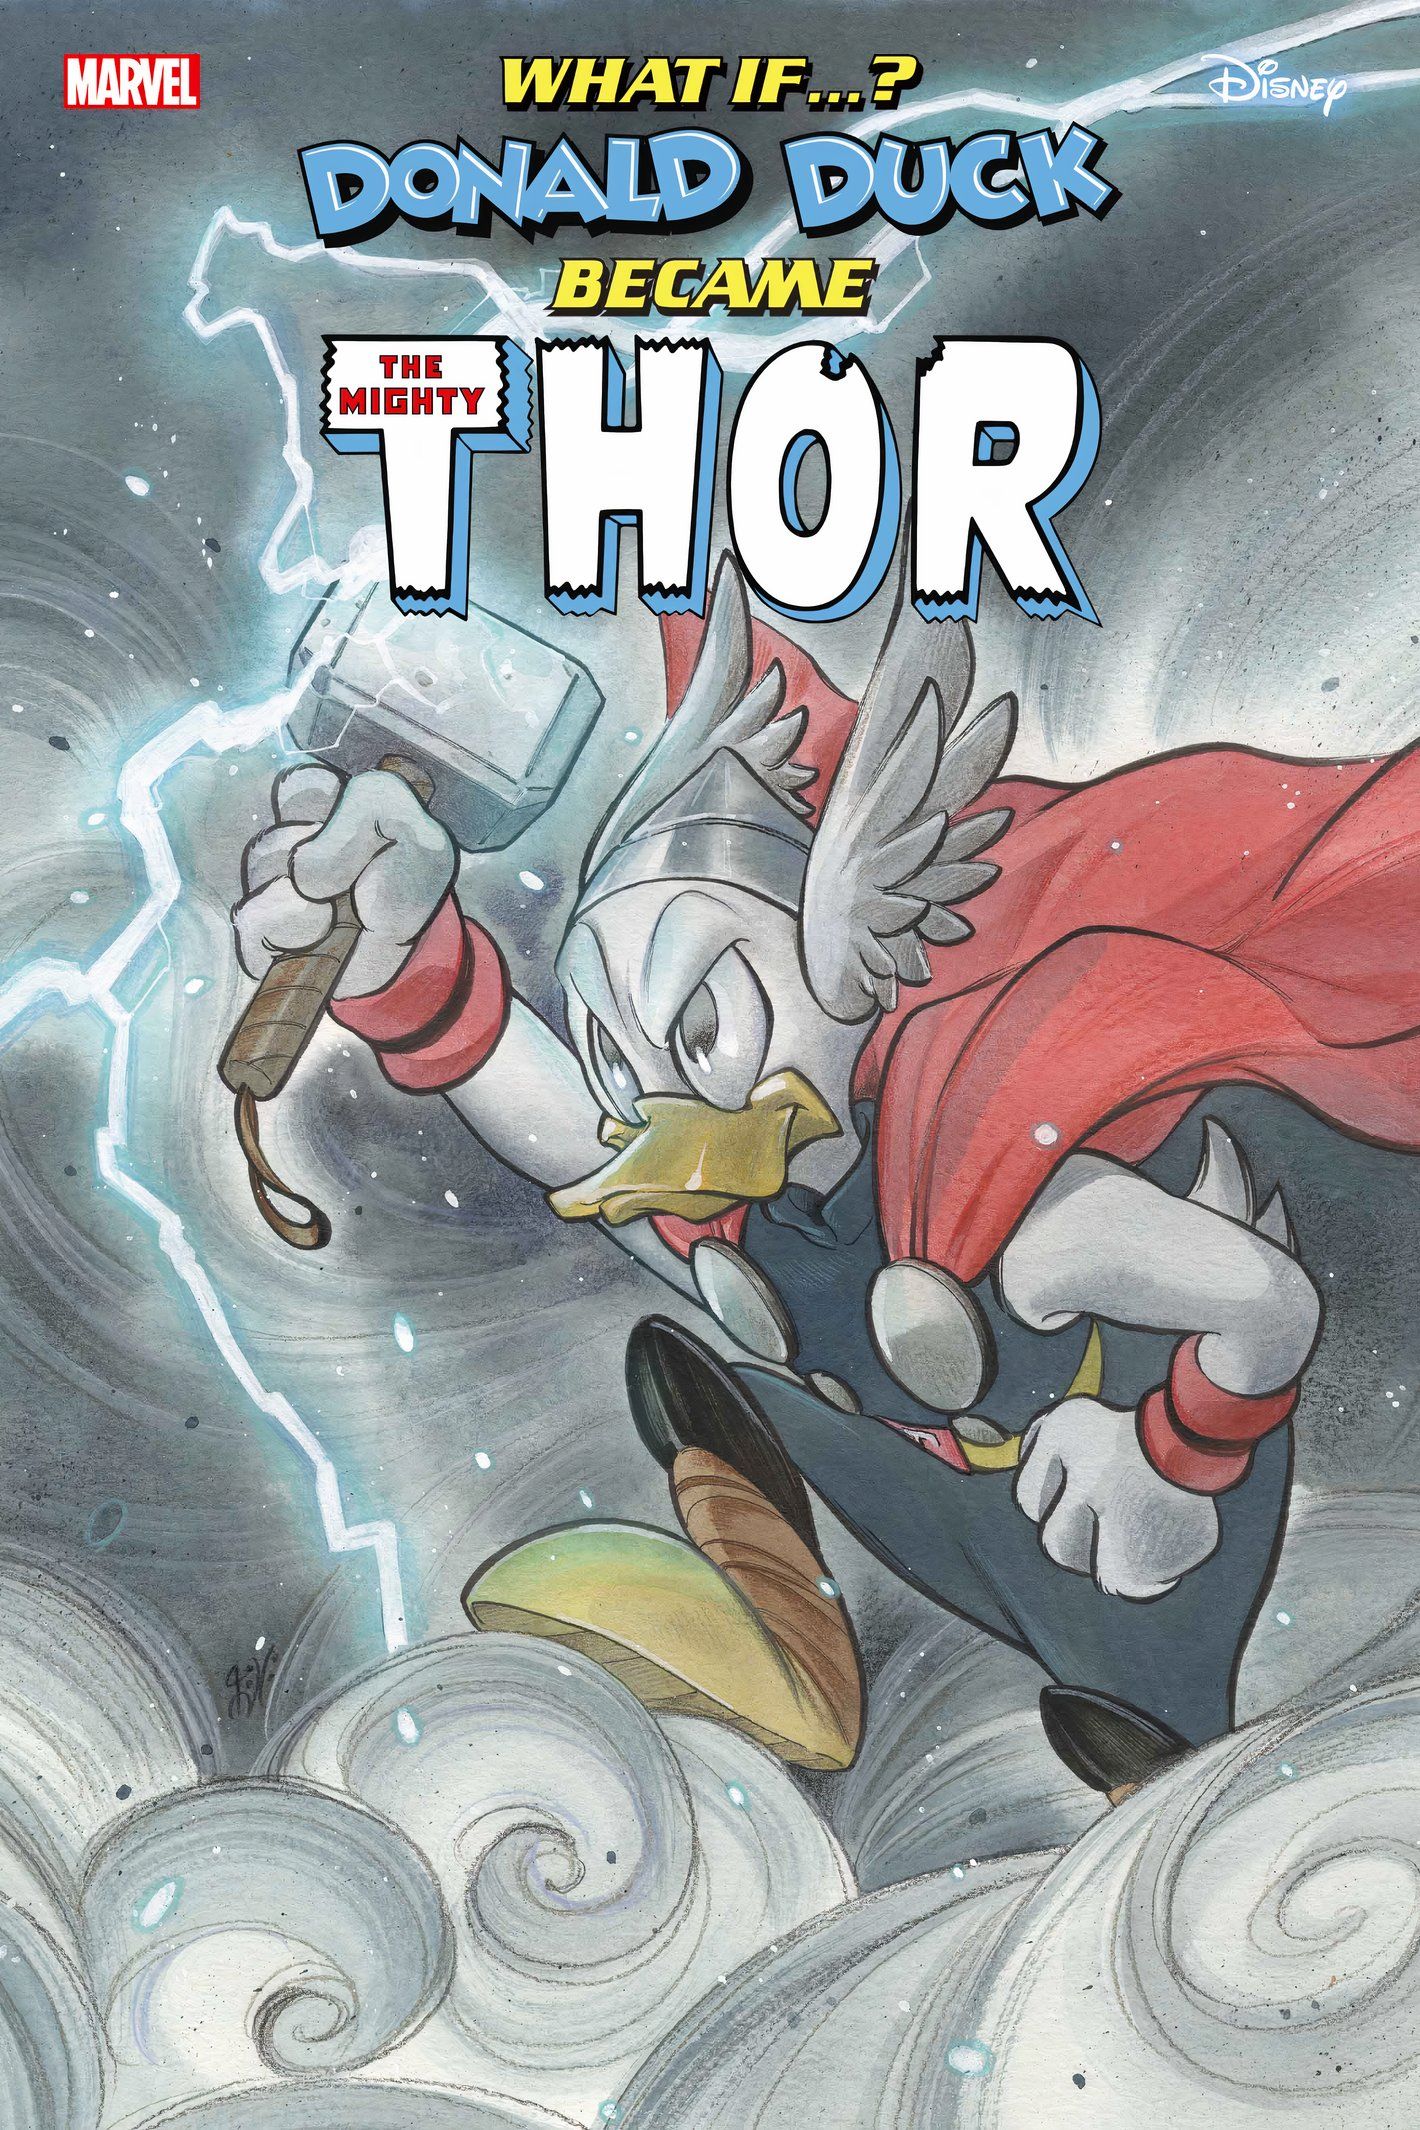 What If Donald Duck Became The Mighty Thor, Peach Momoko variant cover, Donald in Thor's classic outfit.